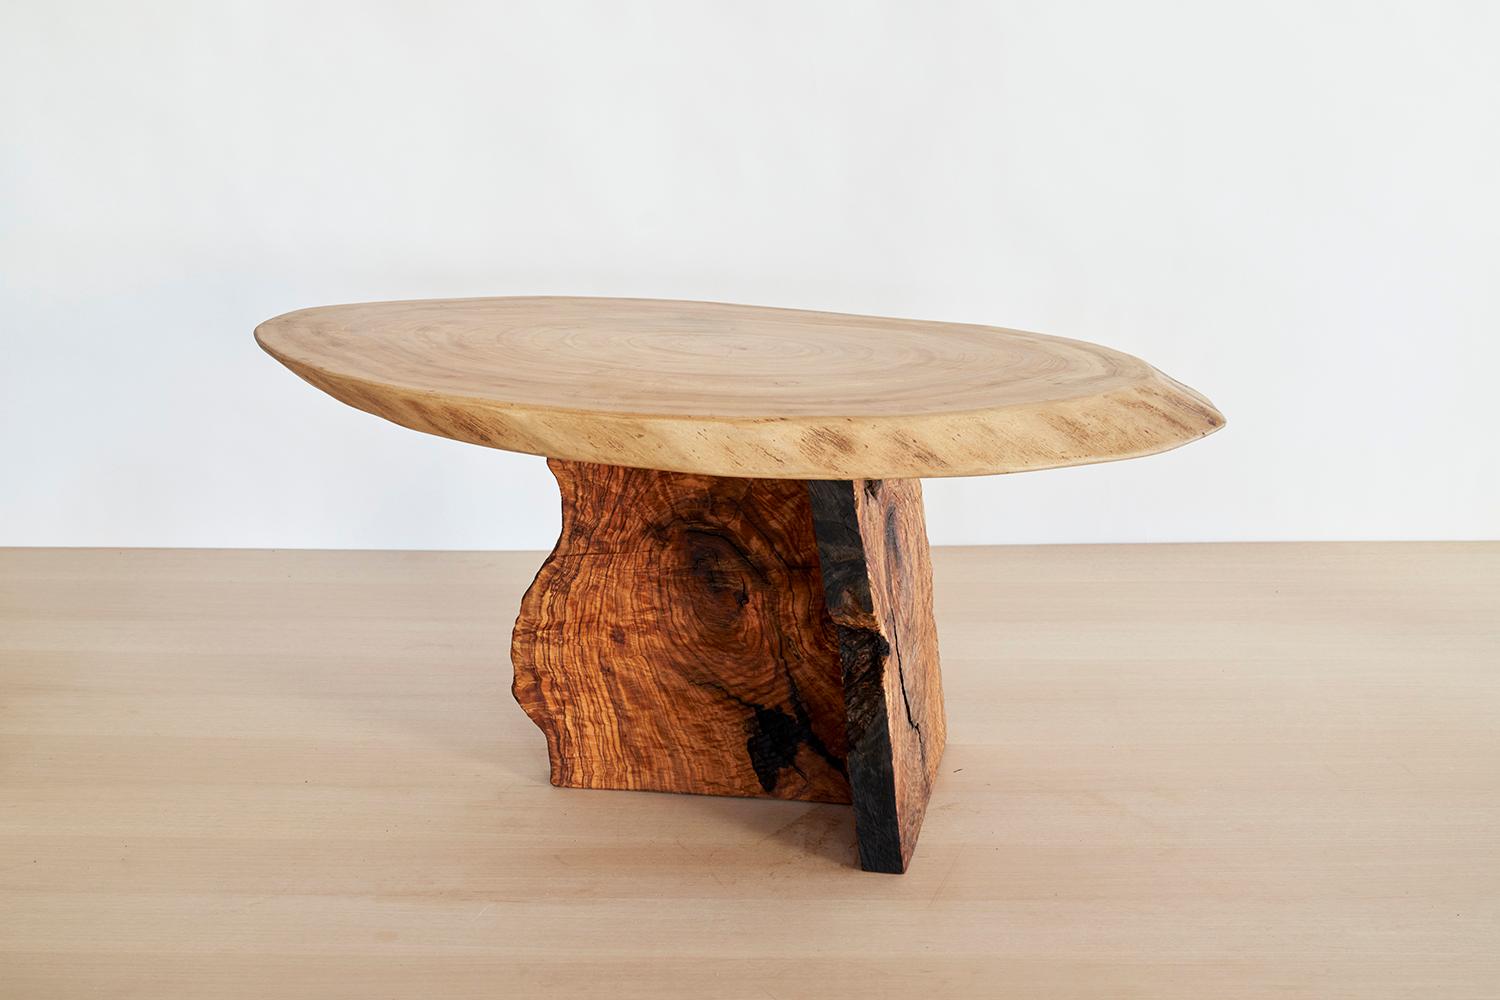 Art Brut Center Table by Jean-Baptiste Van Den Heede
Unique piece
Dimensions: W 45 x D 90 x H 43 cm
Materials: Natural Olive Wood on Elm Wood.

Living room table from the ART BRUT collection. A functional sculpture that can be seen as a side table